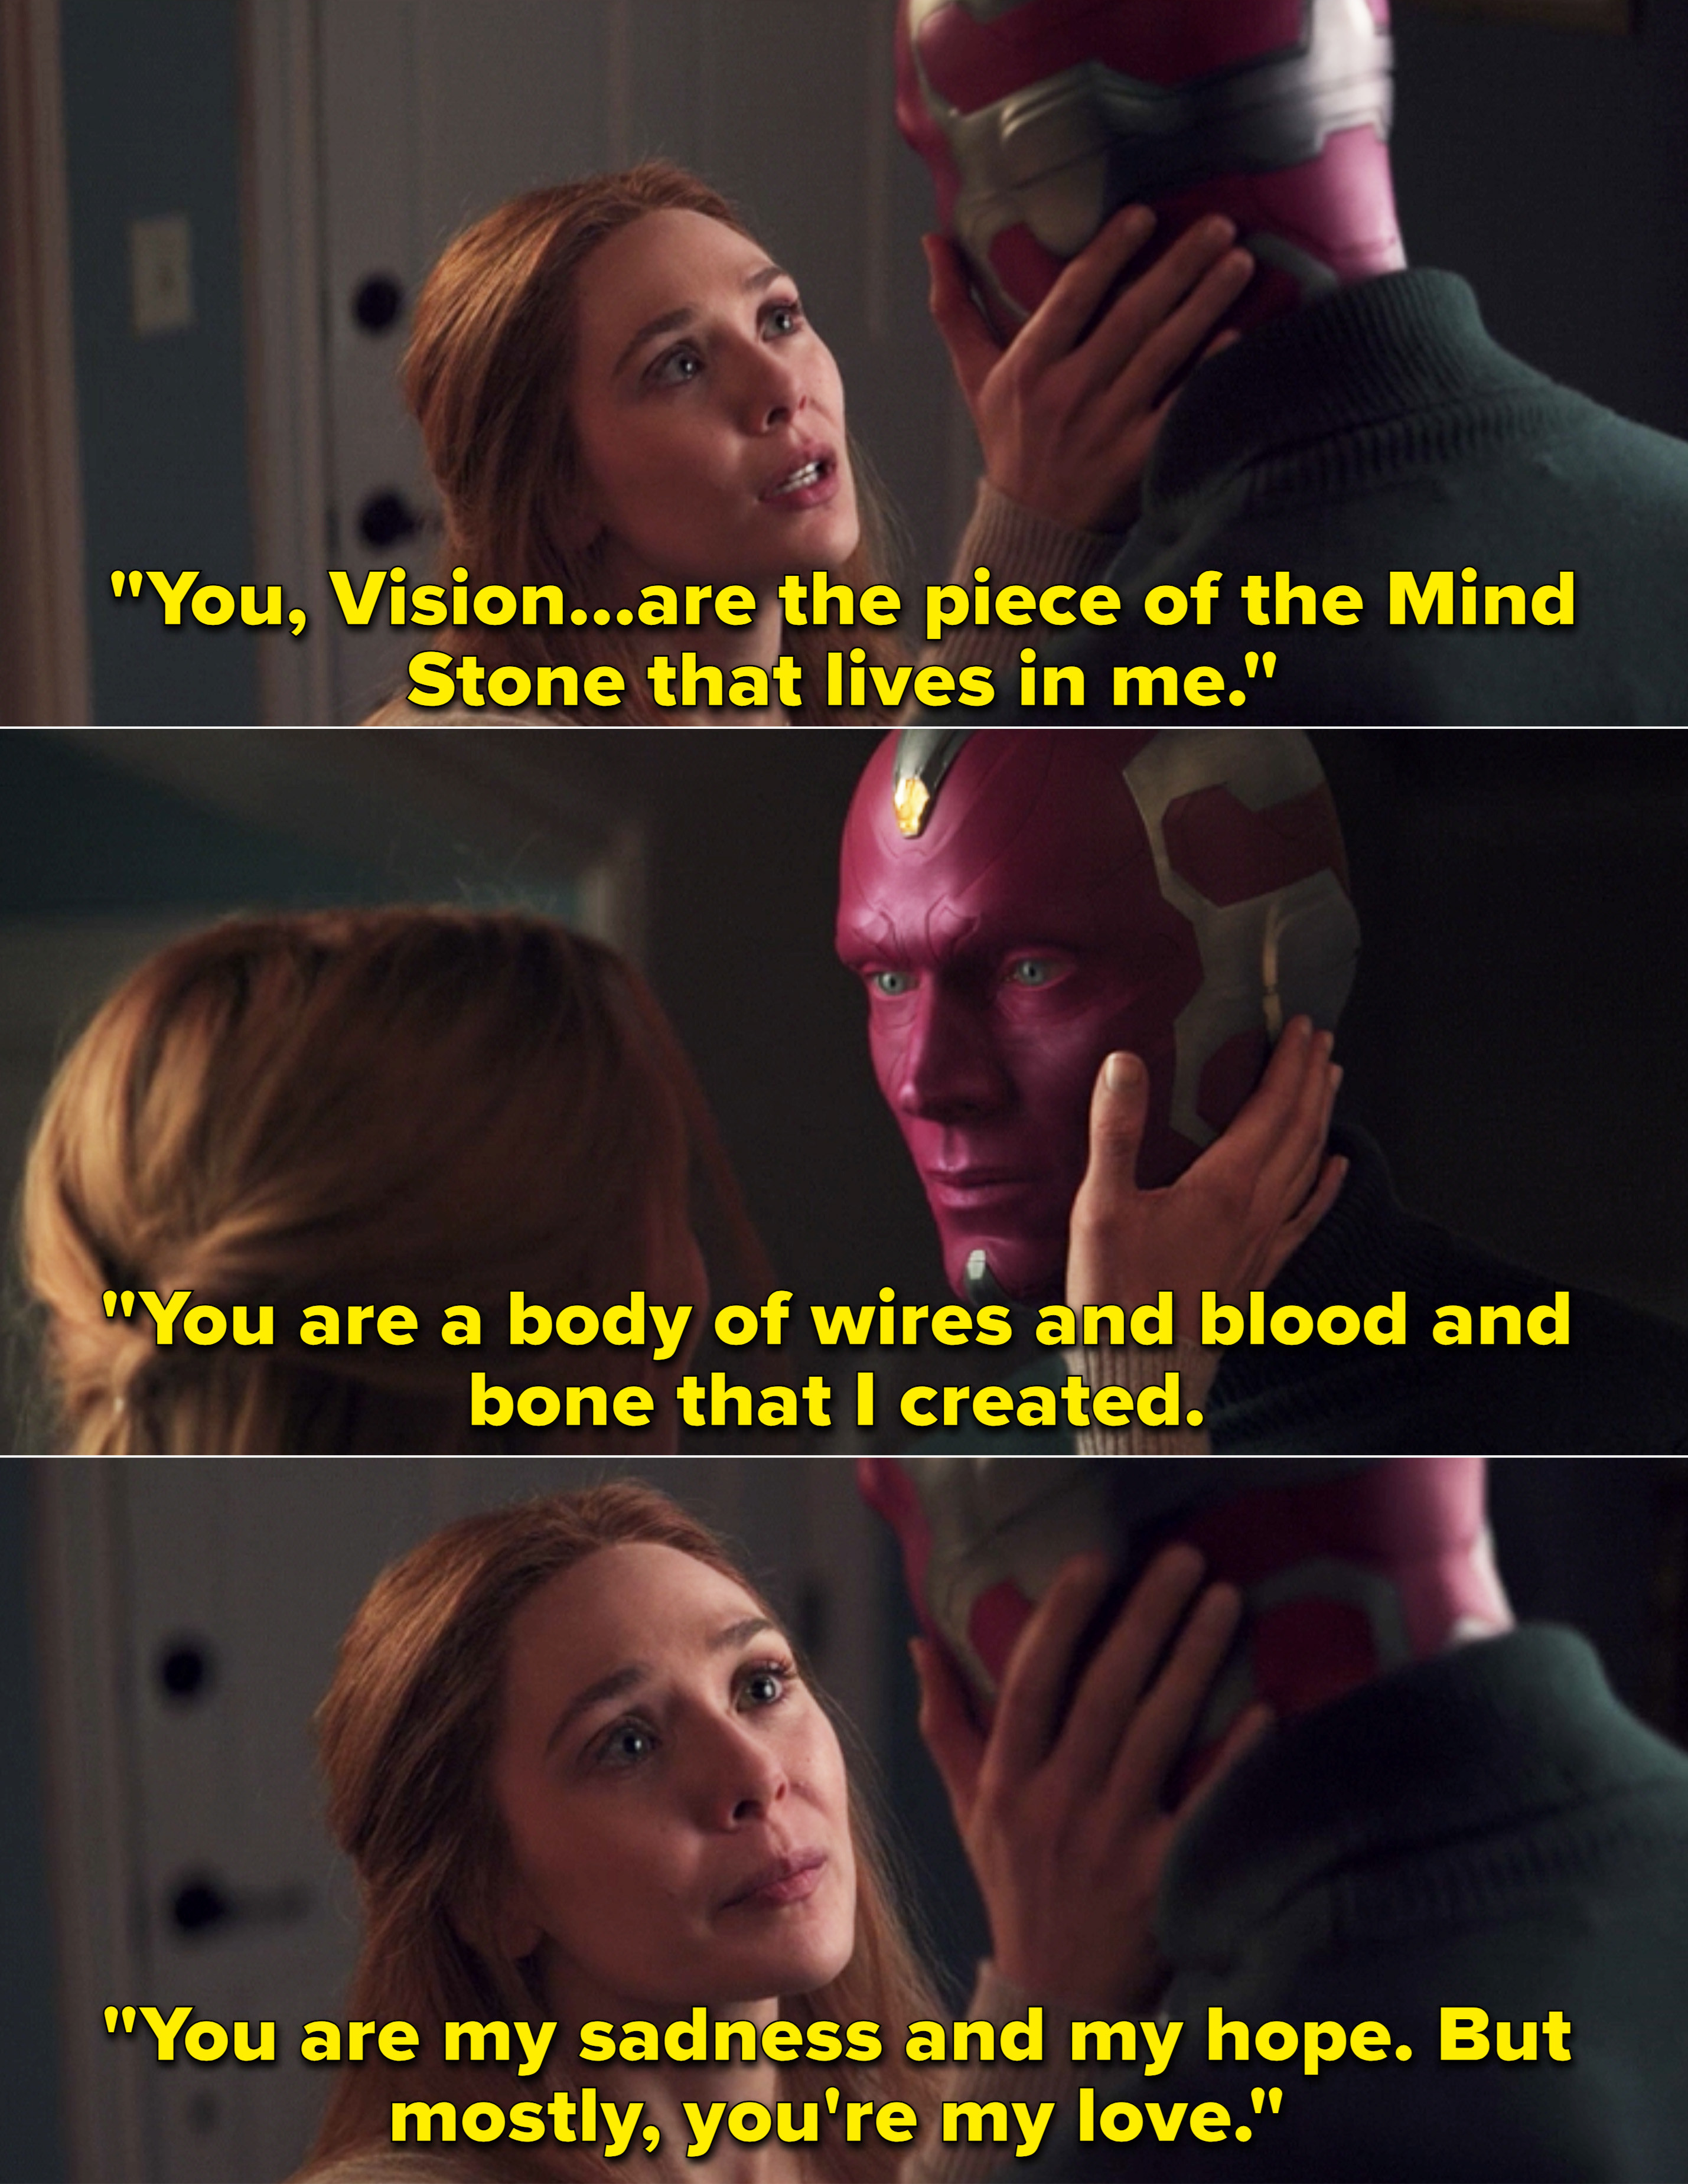 Wanda telling Vision, &quot;You are my sadness and my hope. But mostly, you&#x27;re my love&quot;